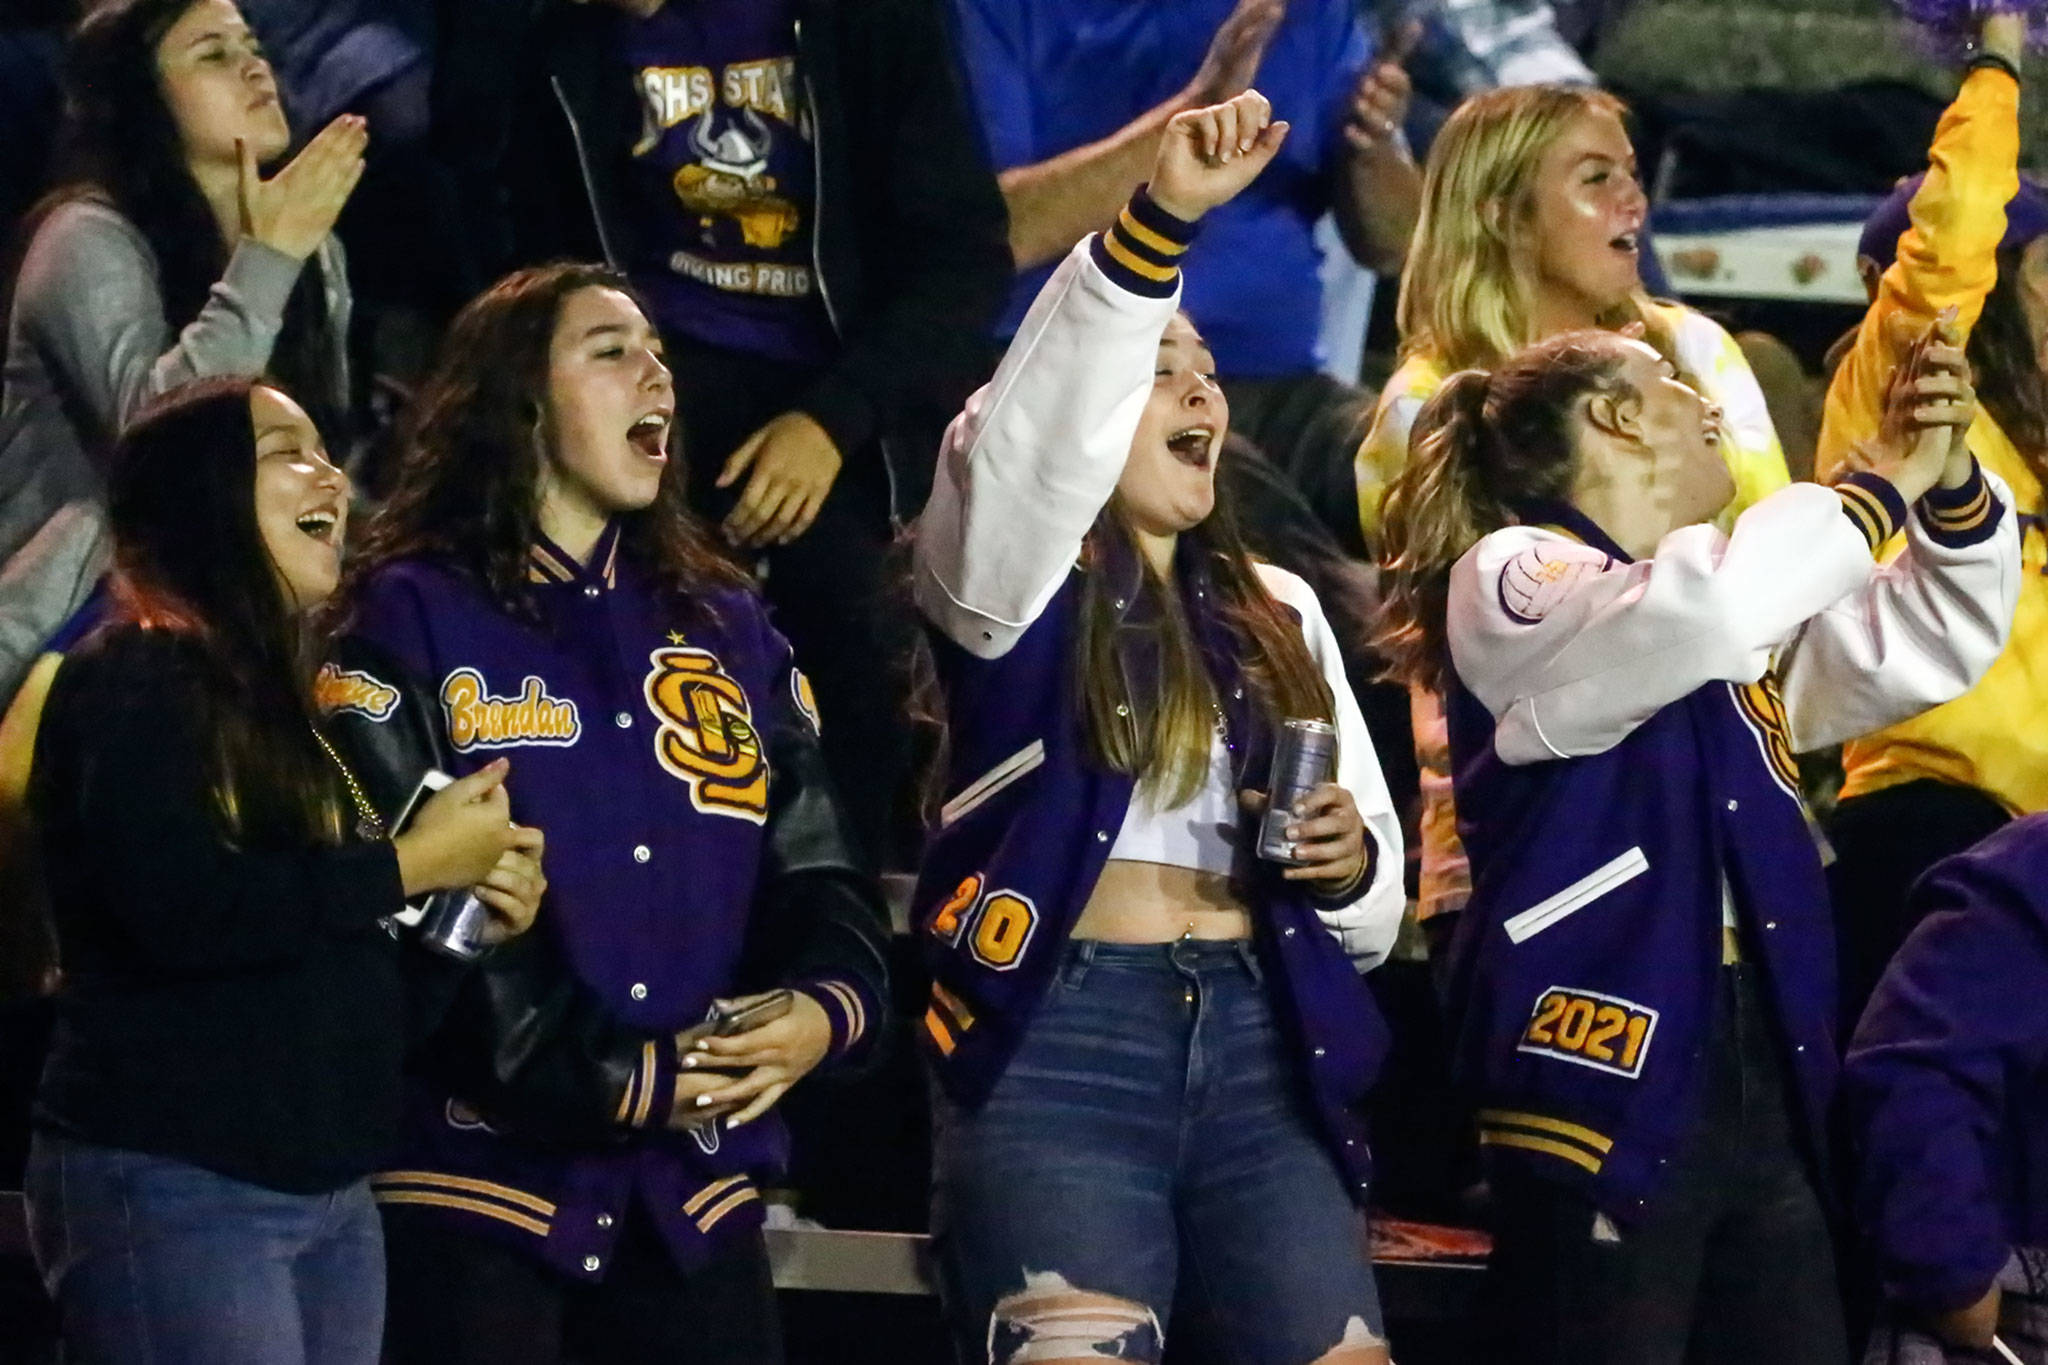 Lake Stevens fans cheer on their football team during a game at the Lincoln Bowl in Tacoma on September 13, 2019. (Kevin Clark / The Herald)